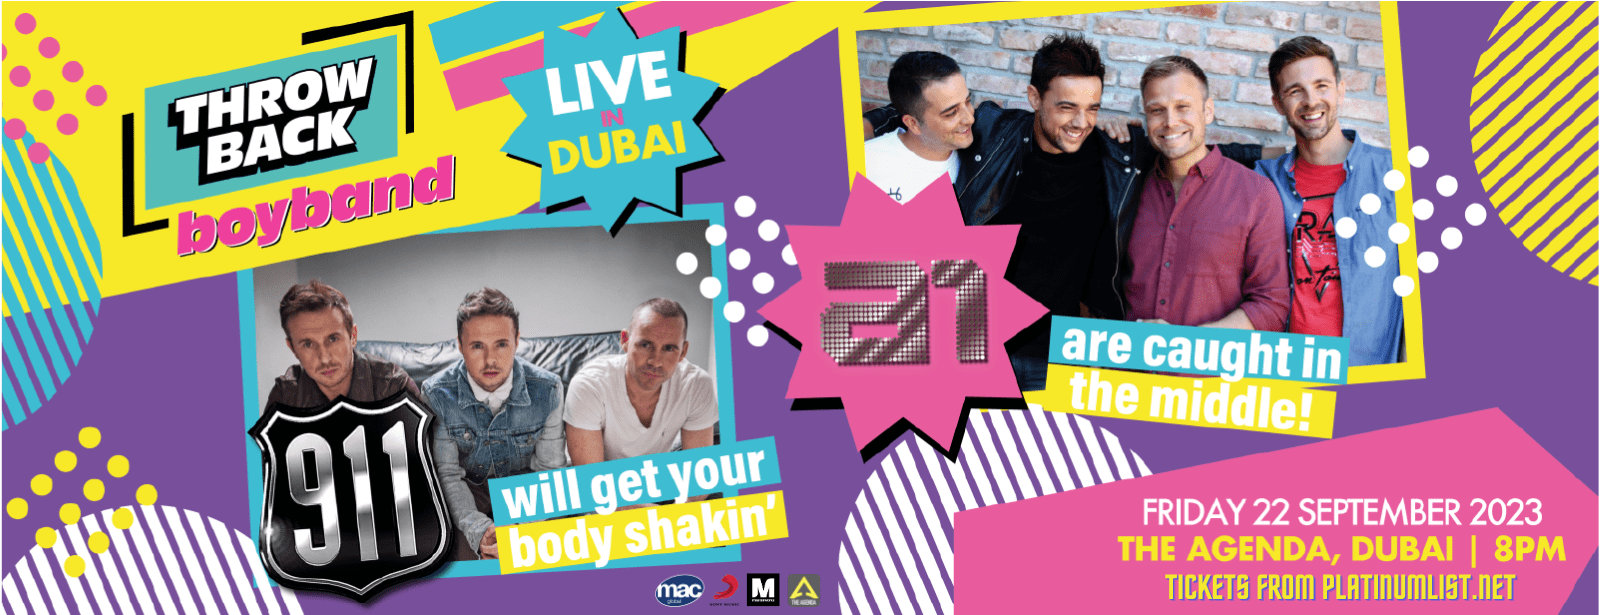 Throwback Boyband Feat. A1 and 911 Live in Dubai - Coming Soon in UAE